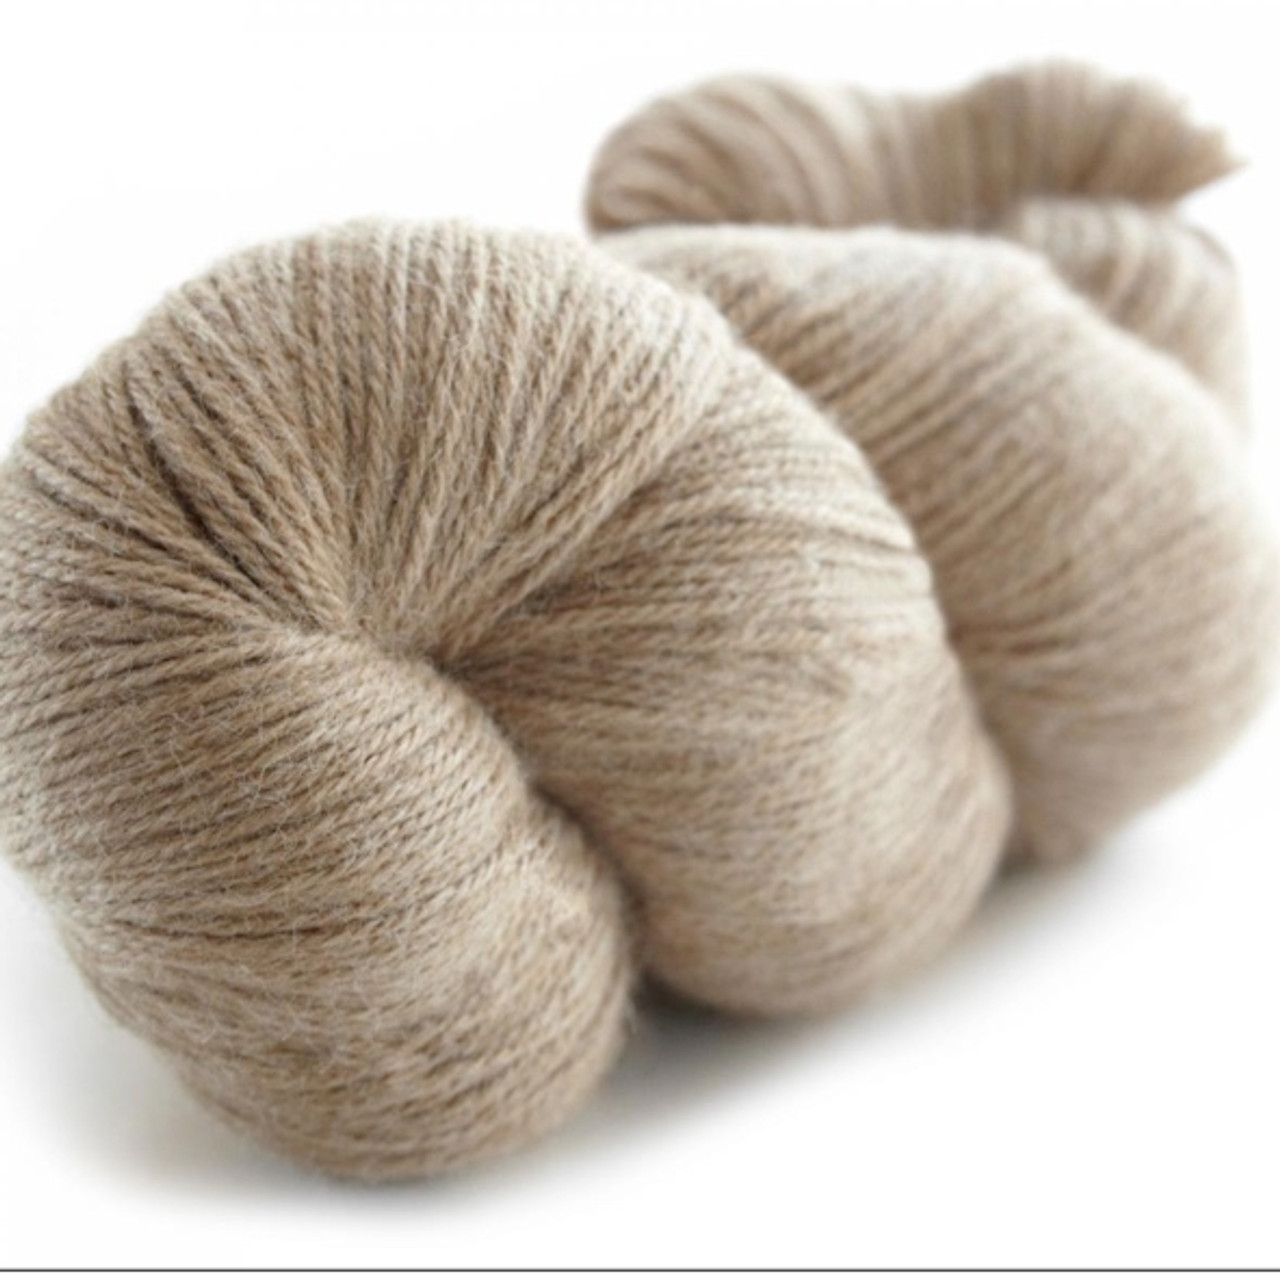 Alpaca Wool - What Makes it so Special? – JJ Caprices